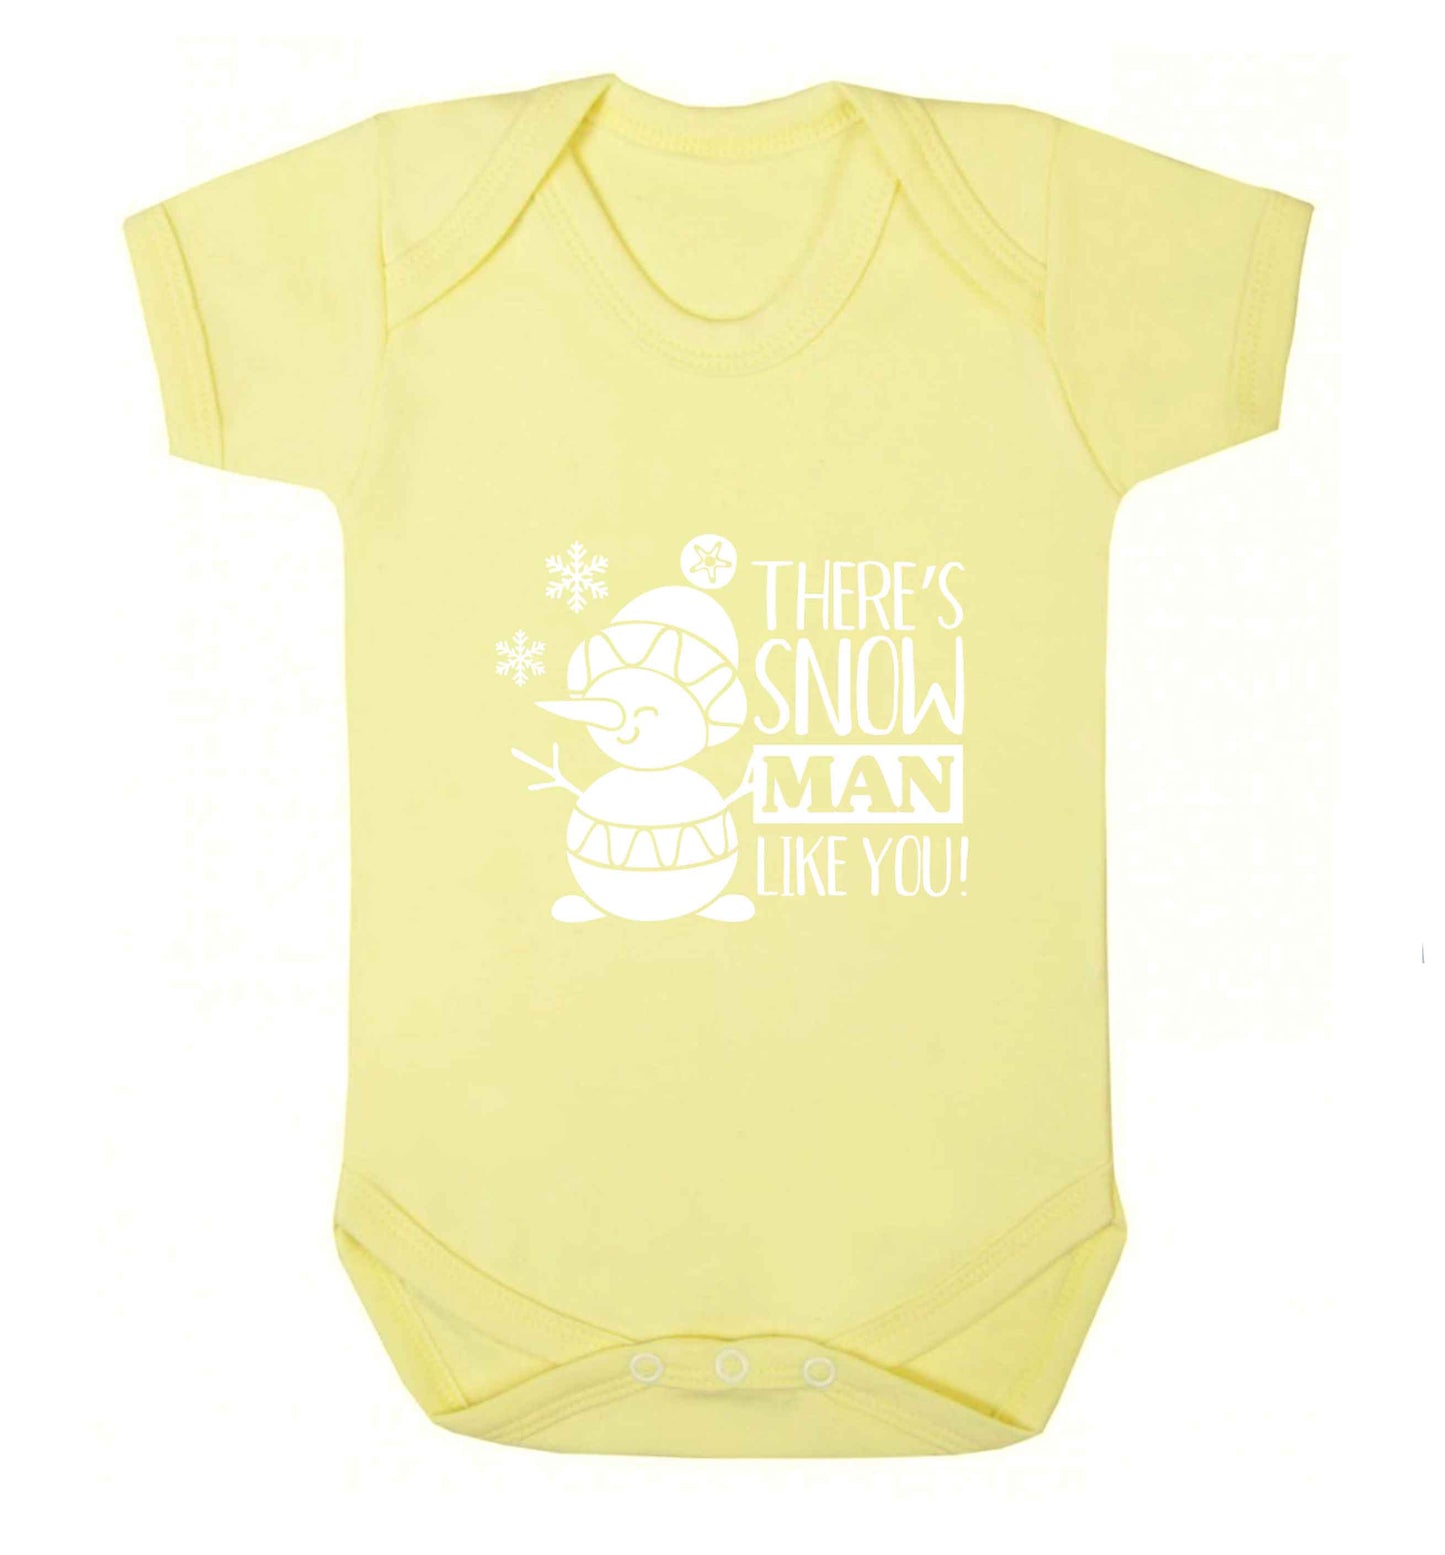 There's snow man like you baby vest pale yellow 18-24 months